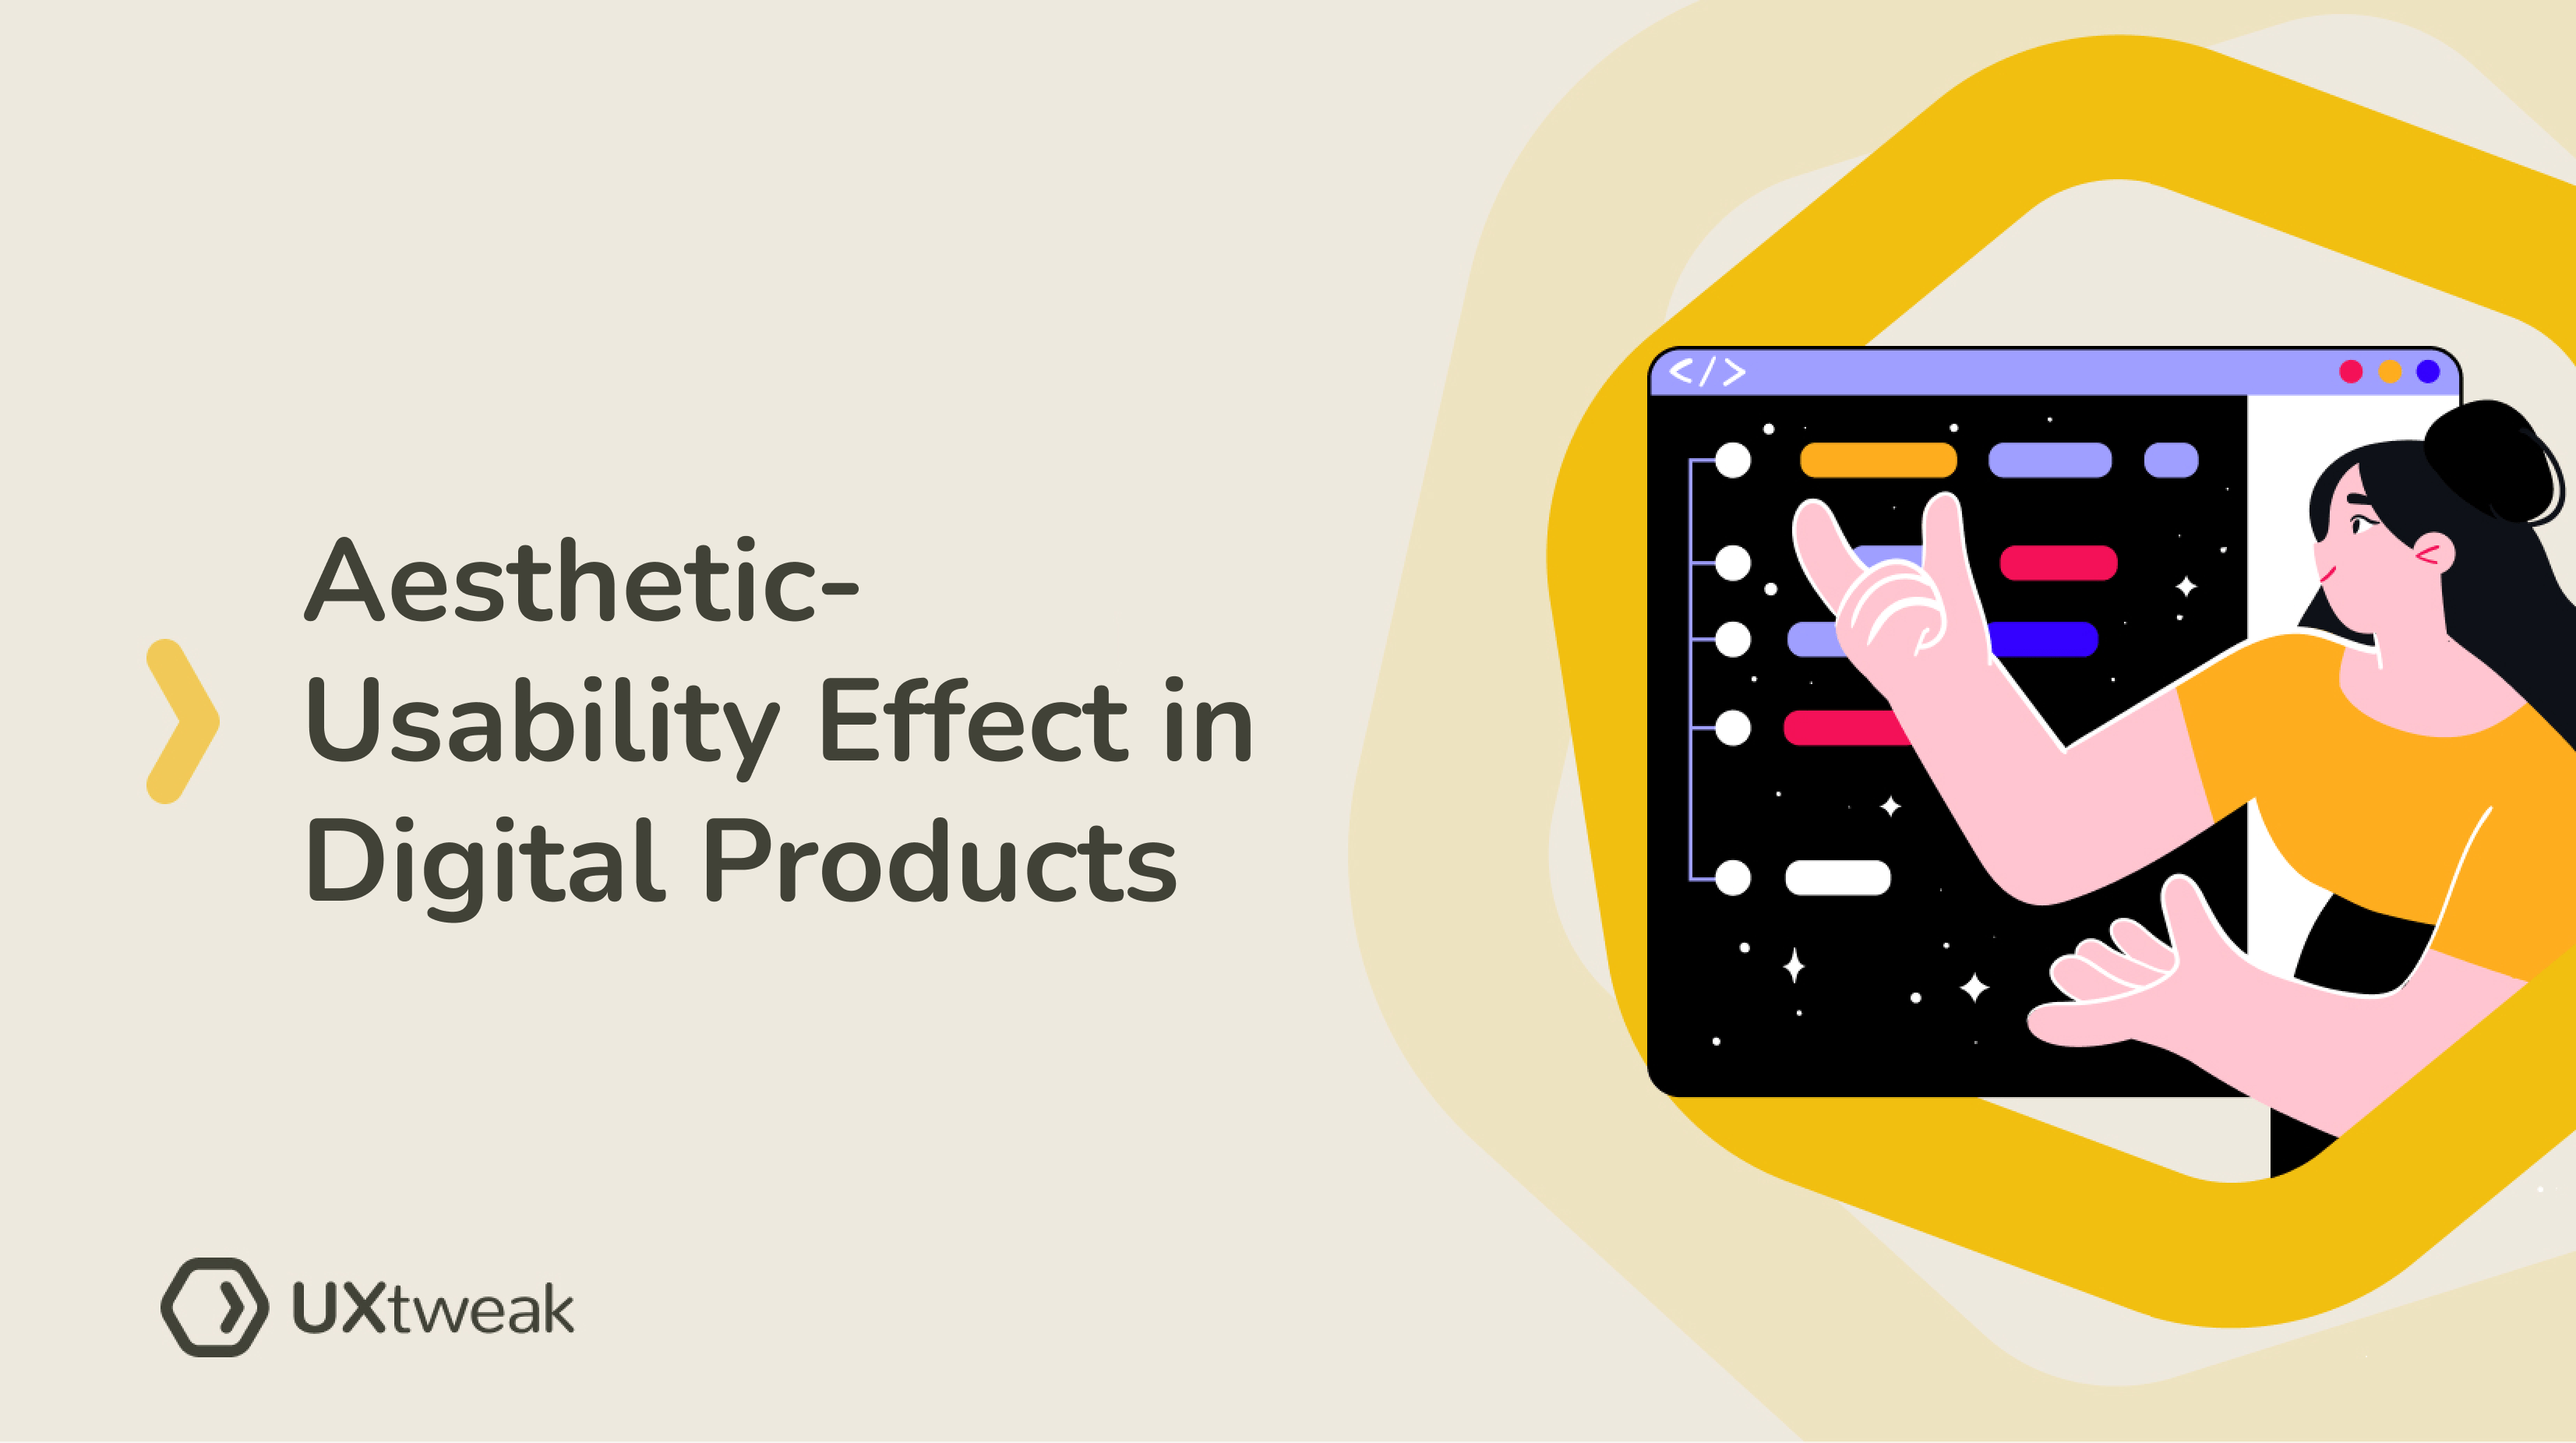 How to Test for the Aesthetic-Usability Effect in Digital Products